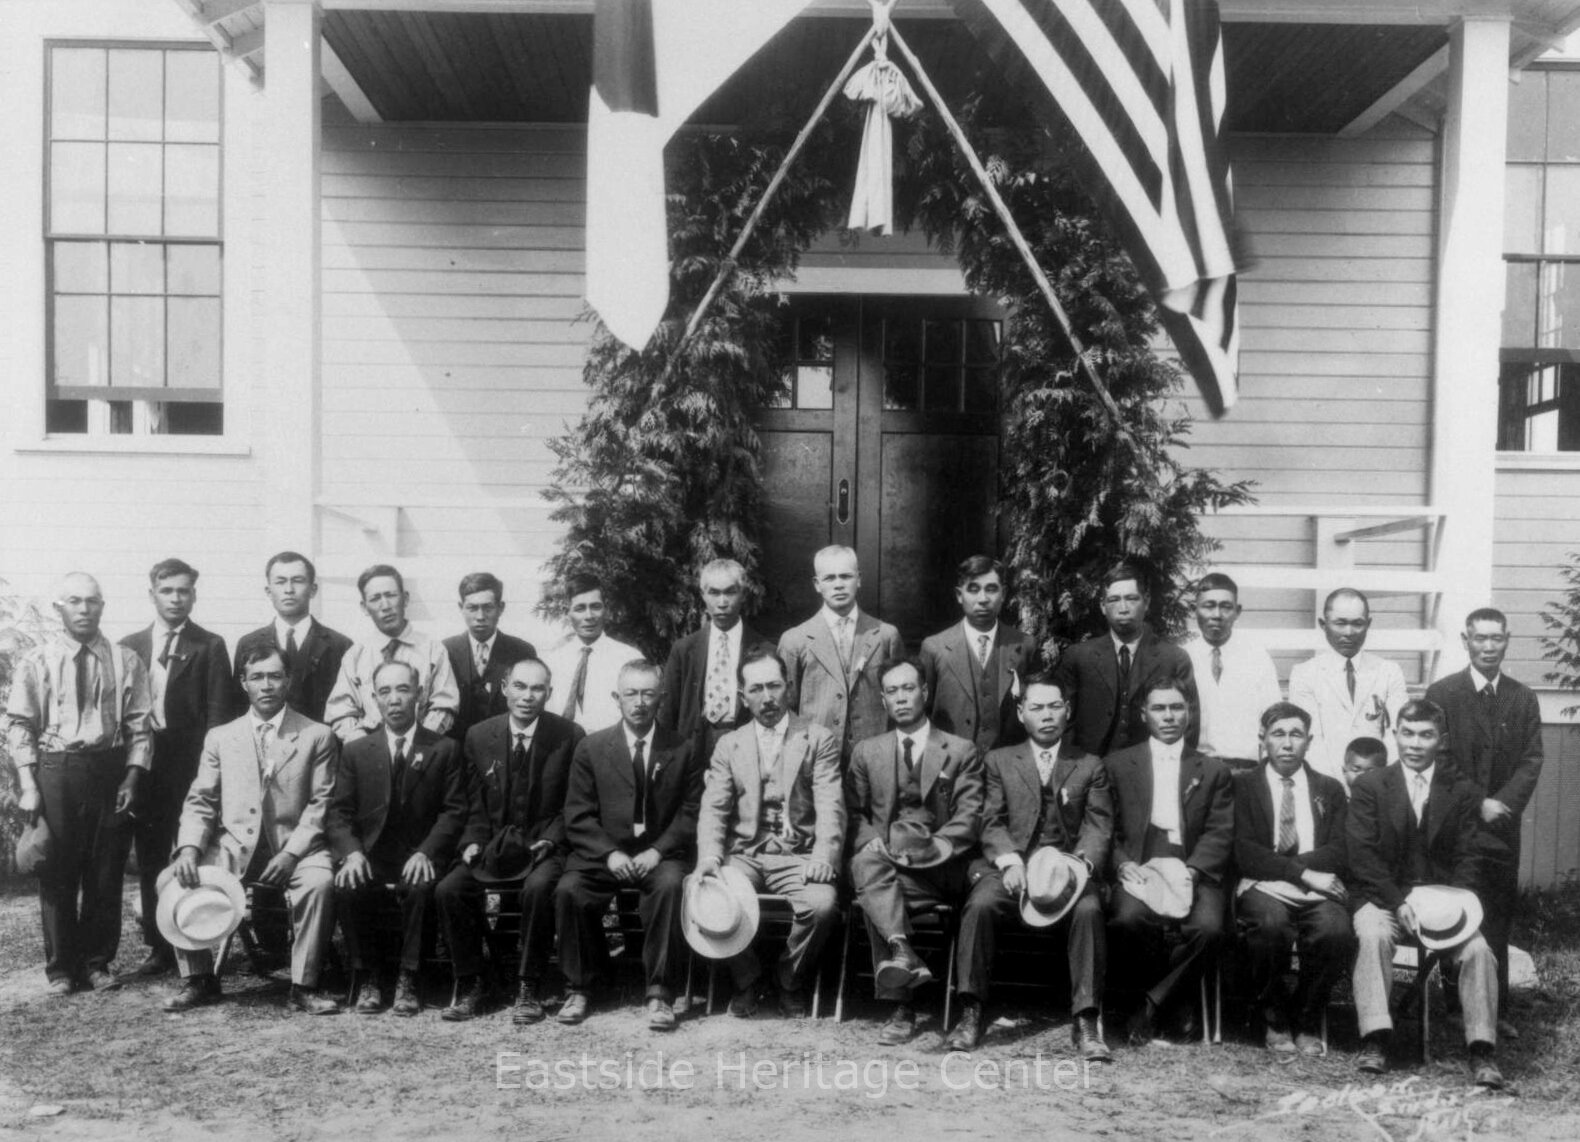 81 years ago this month, the Japanese and Japanese American residents of the Eastside were forcibly removed from their homes under Executive Order 9066. 

Pictured here are Japanese community leaders at the dedication of the Bellevue Nihonjinkai Koka